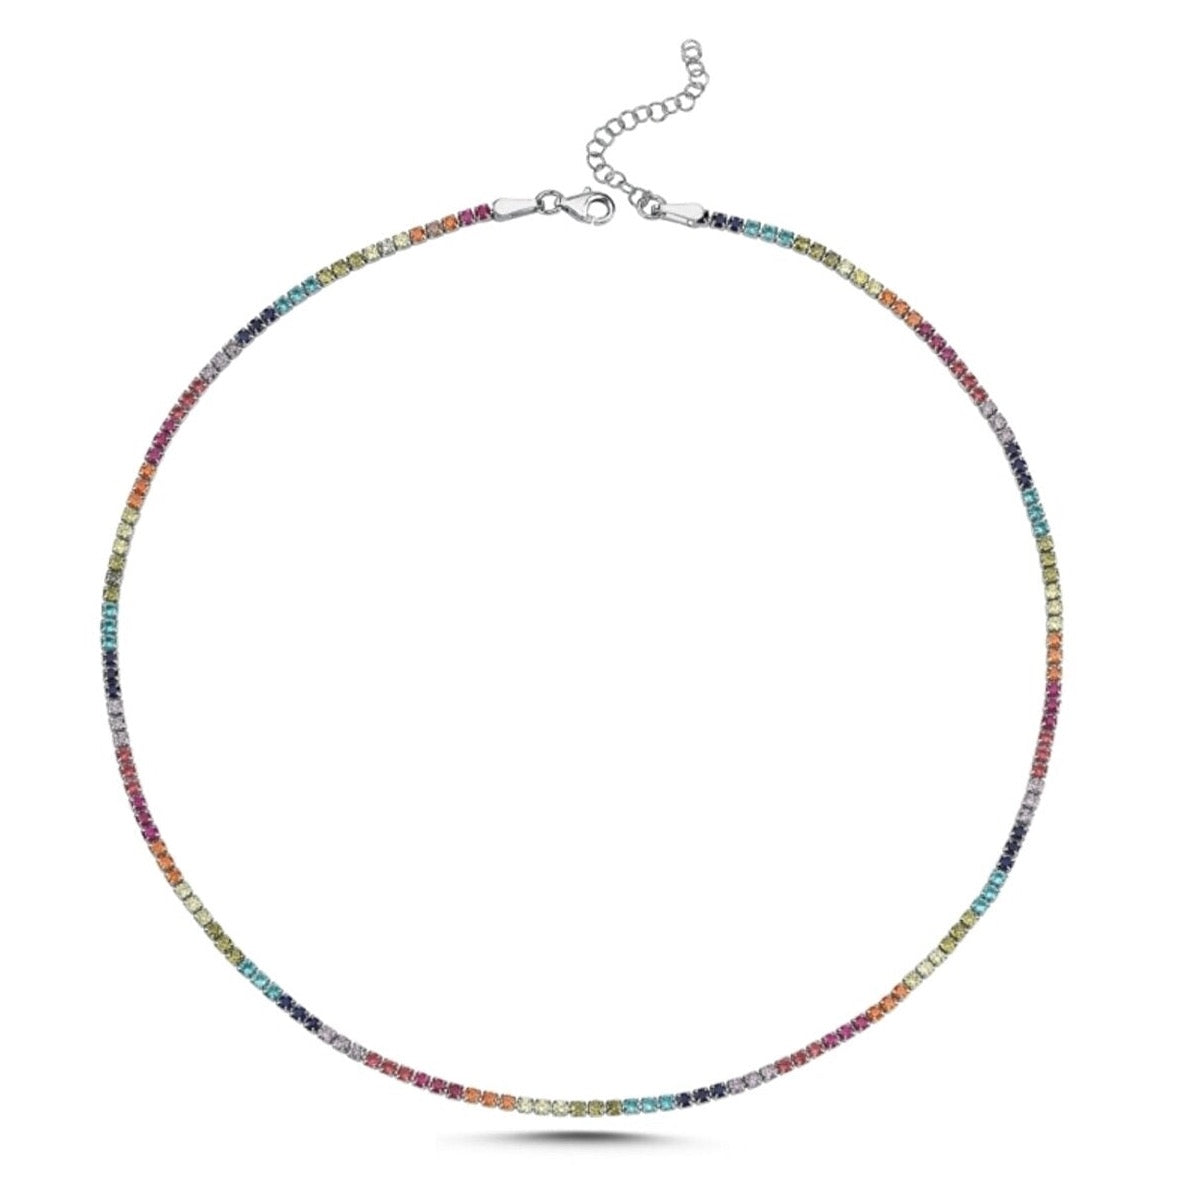 Rainbow Colourful Sterling Silver Tennis Necklace